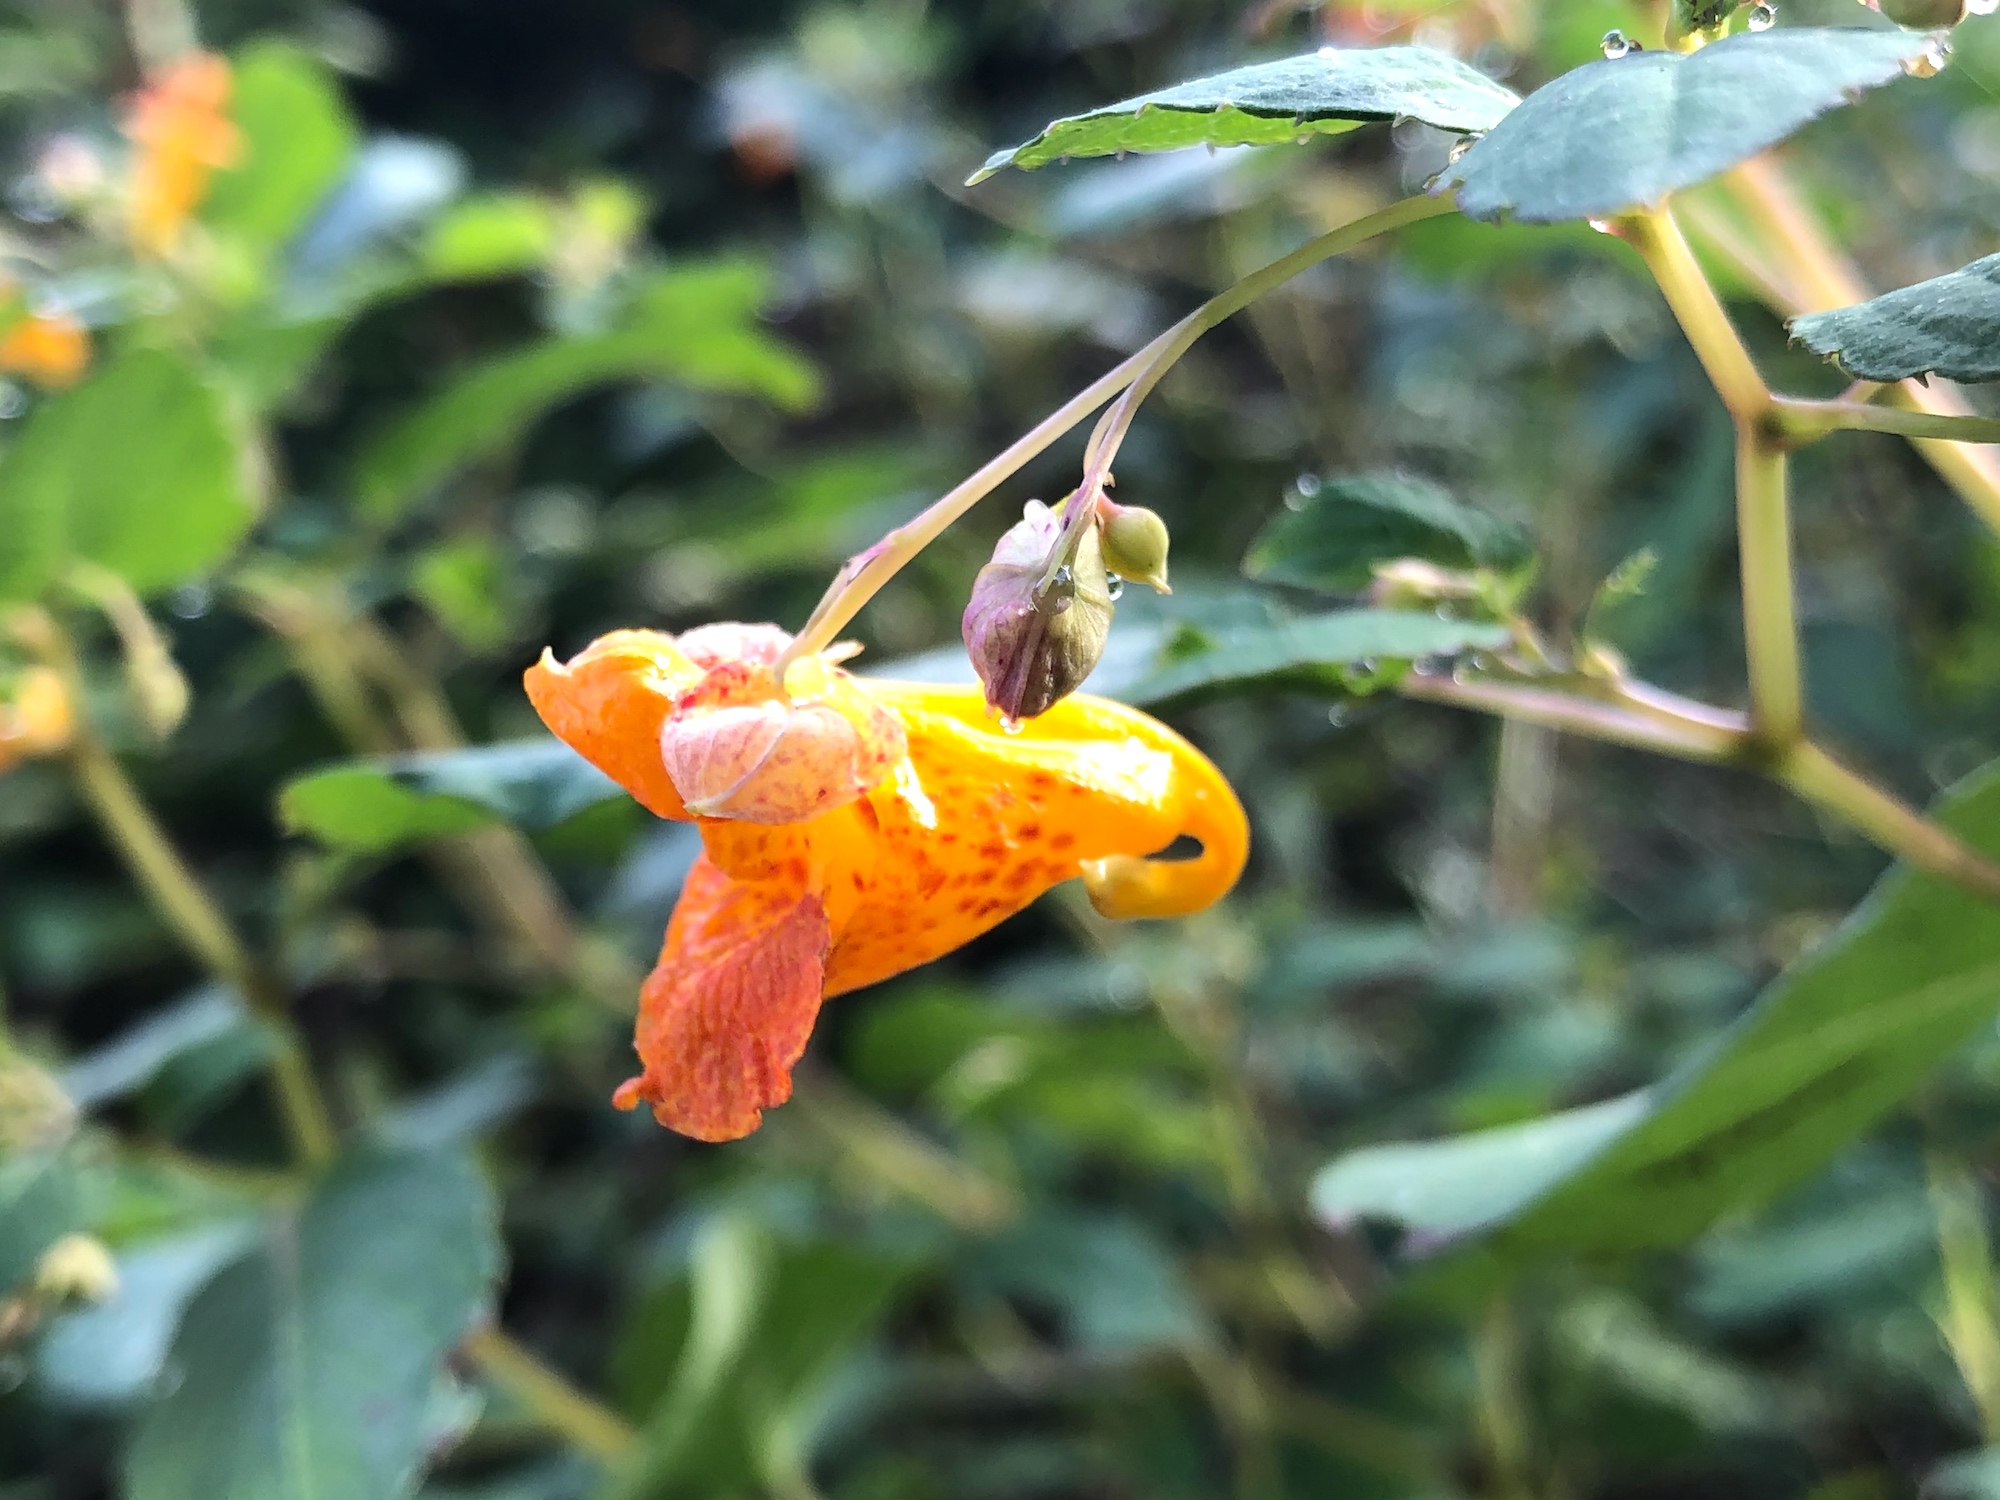 Spotted Jewelweed on shore of Duck Pond on September 1, 2019.